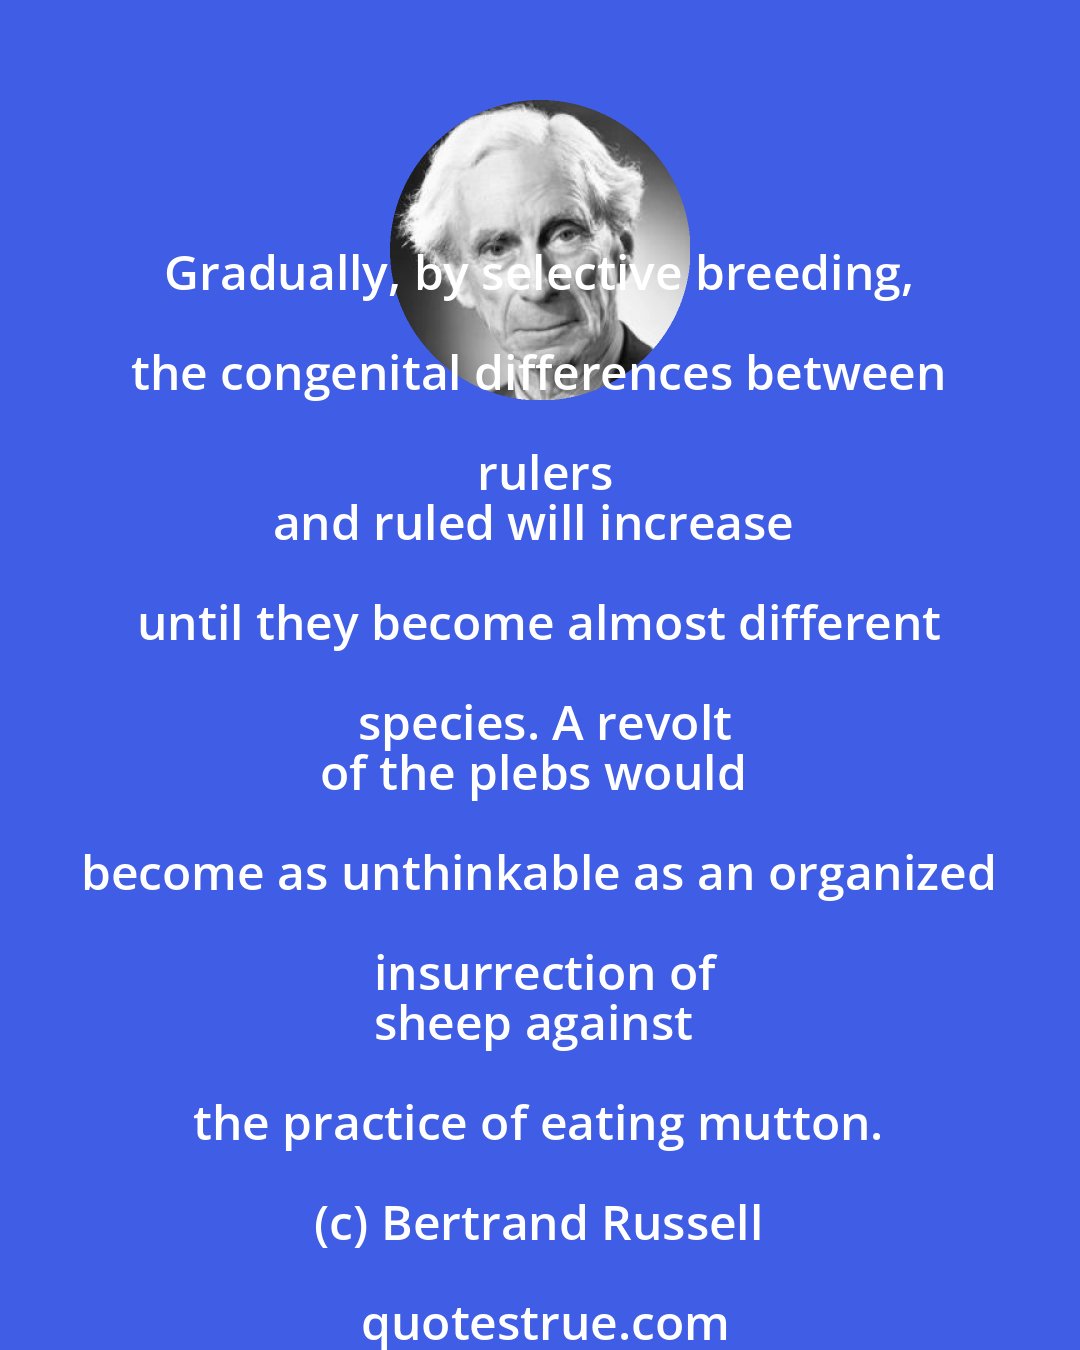 Bertrand Russell: Gradually, by selective breeding, the congenital differences between rulers
and ruled will increase until they become almost different species. A revolt
of the plebs would become as unthinkable as an organized insurrection of
sheep against the practice of eating mutton.